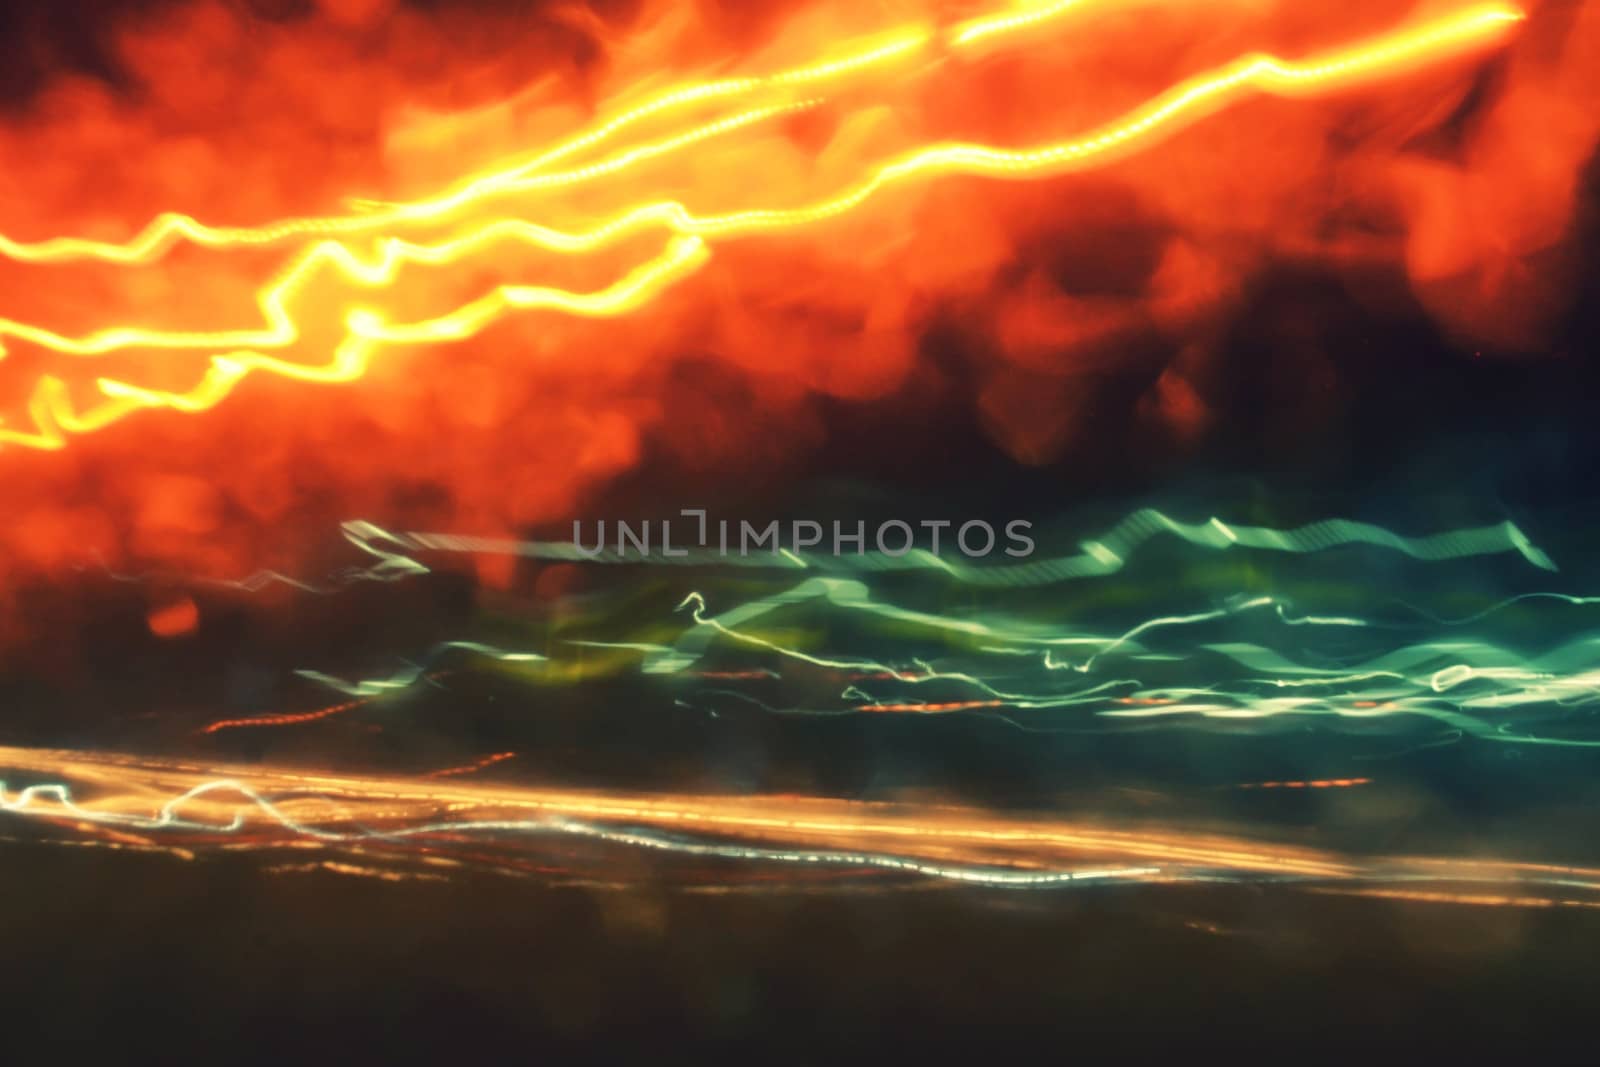 speed of lights for abstract background